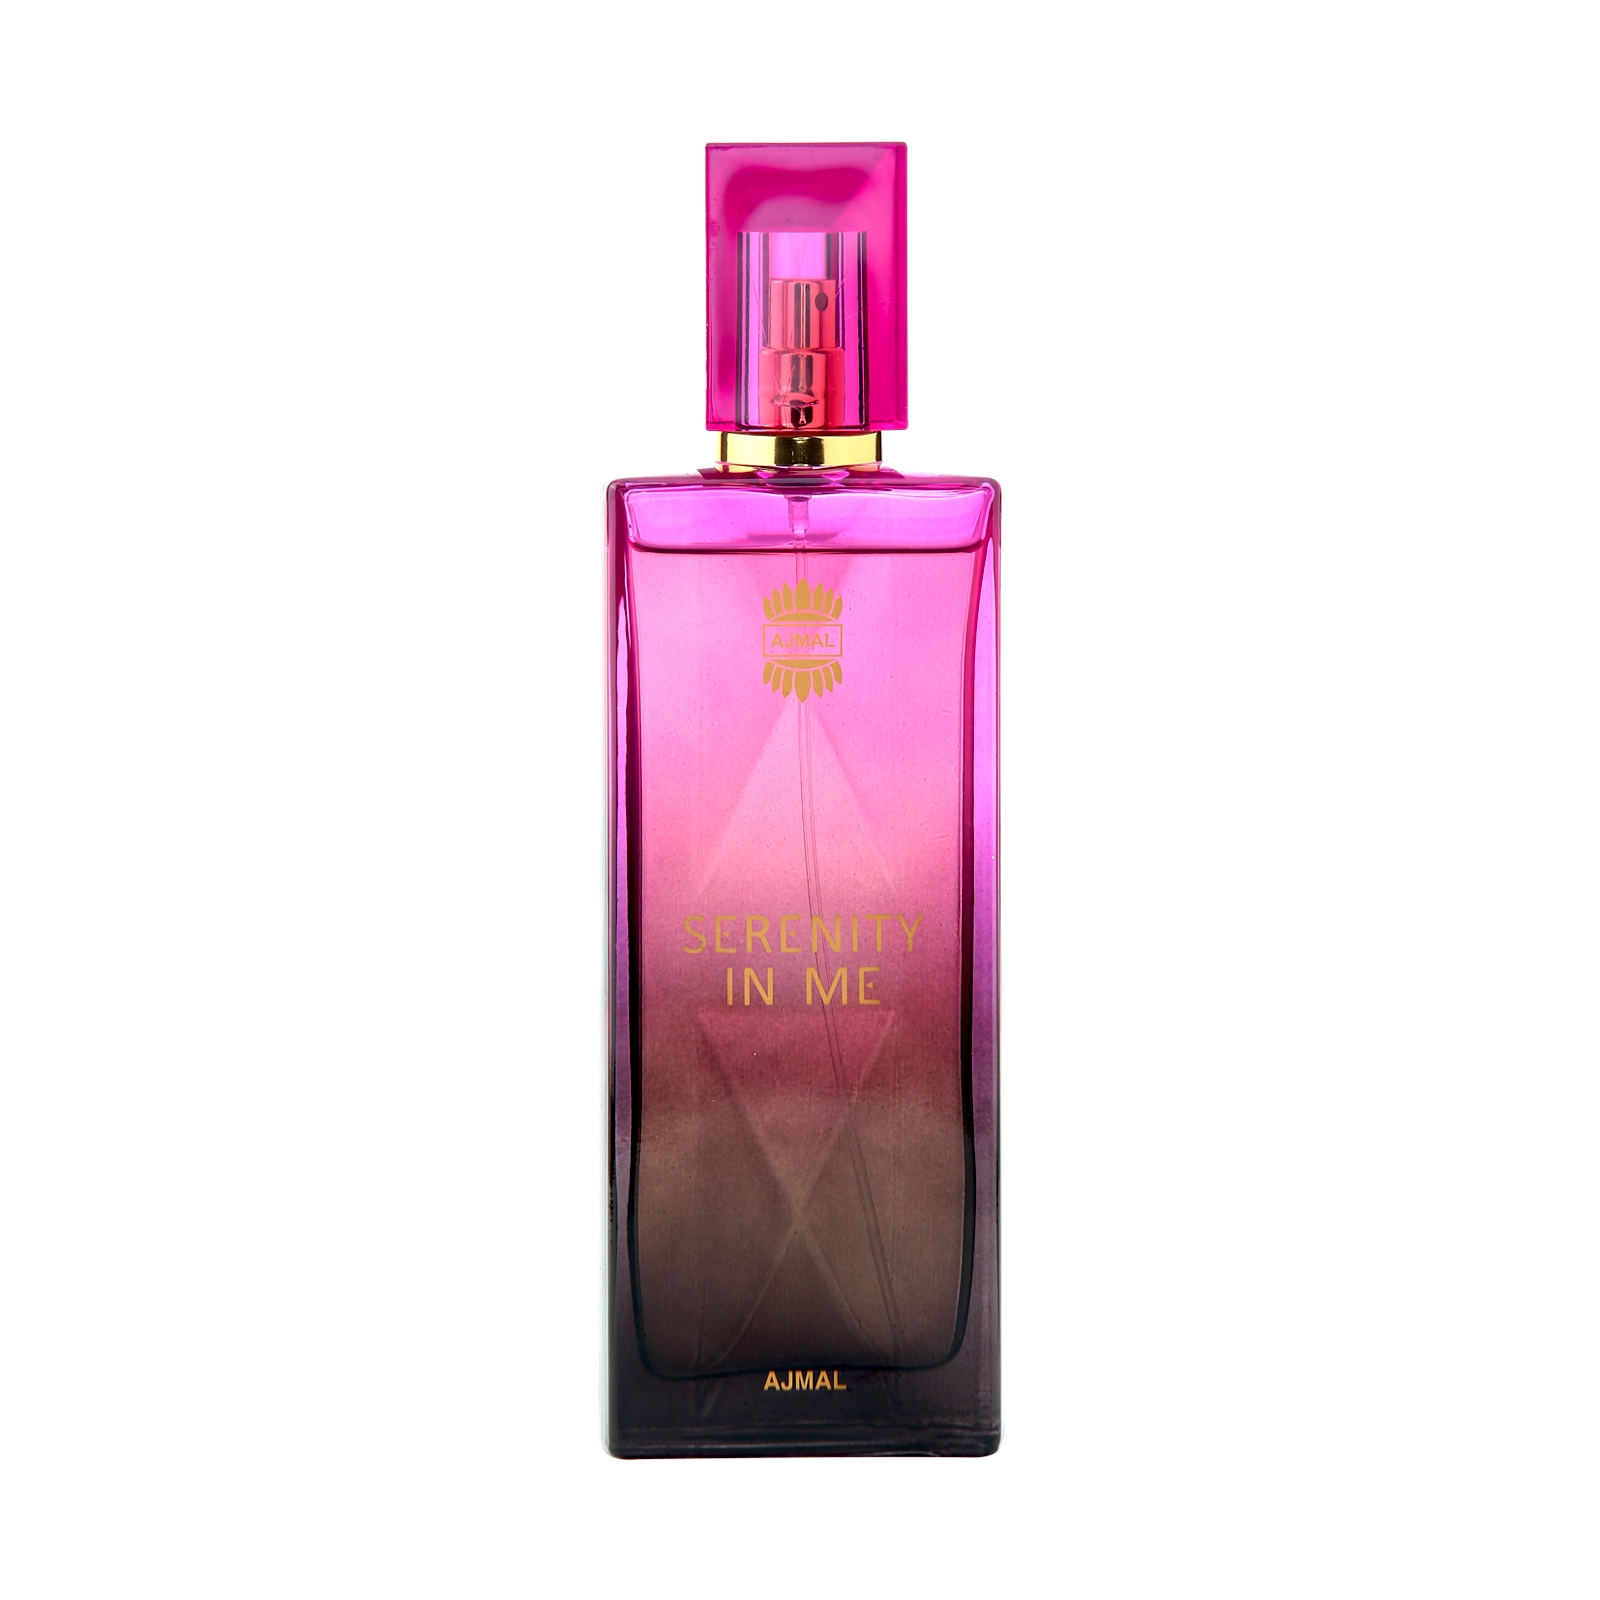 Ajmal | AJMAL SERENITY IN ME Perfume EDP Women 100ML Long Last Scent Spray Online Exclusive Made in Dubai +2Testers